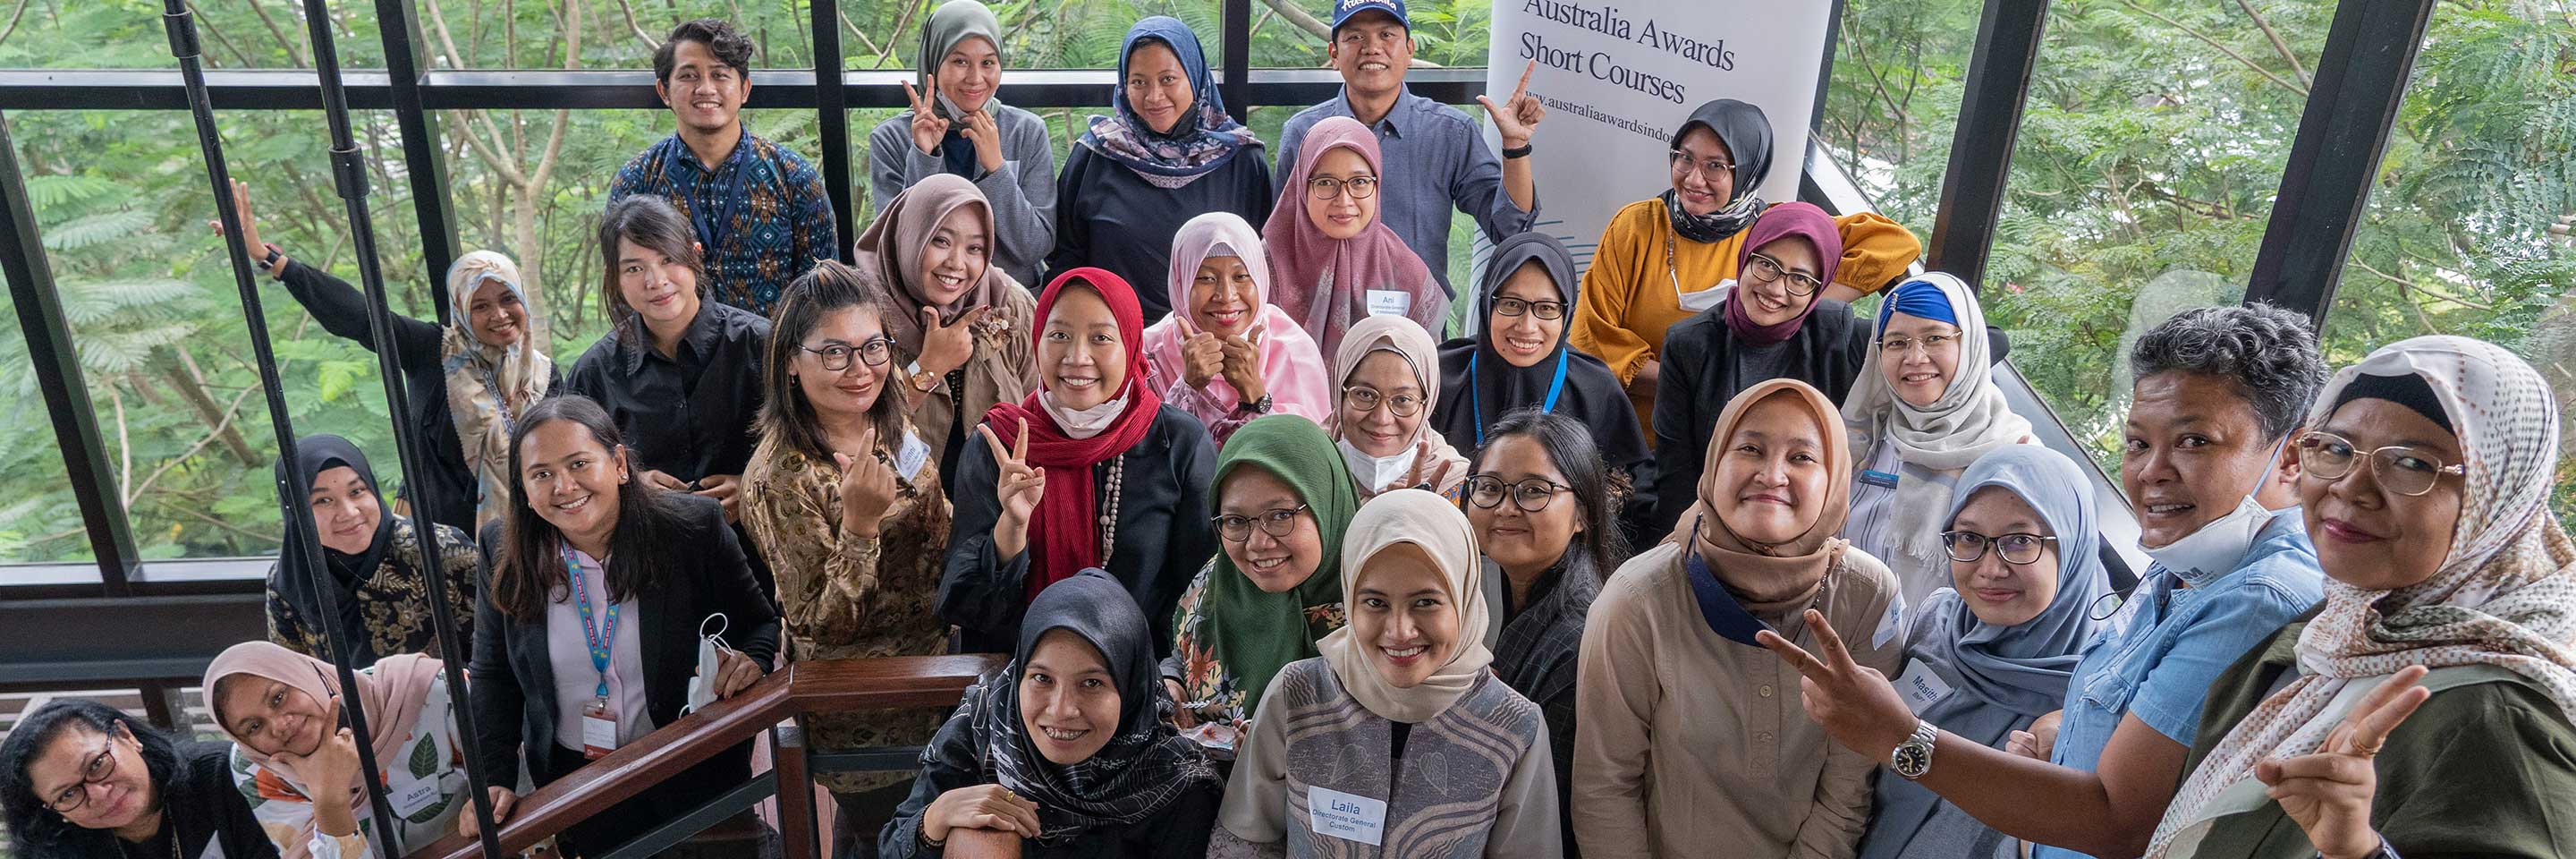 Representatives from the Indonesian government's security agencies, including the National Armed Forces and Police, attend a Short Course on Women in Leadership in the Security Sector.